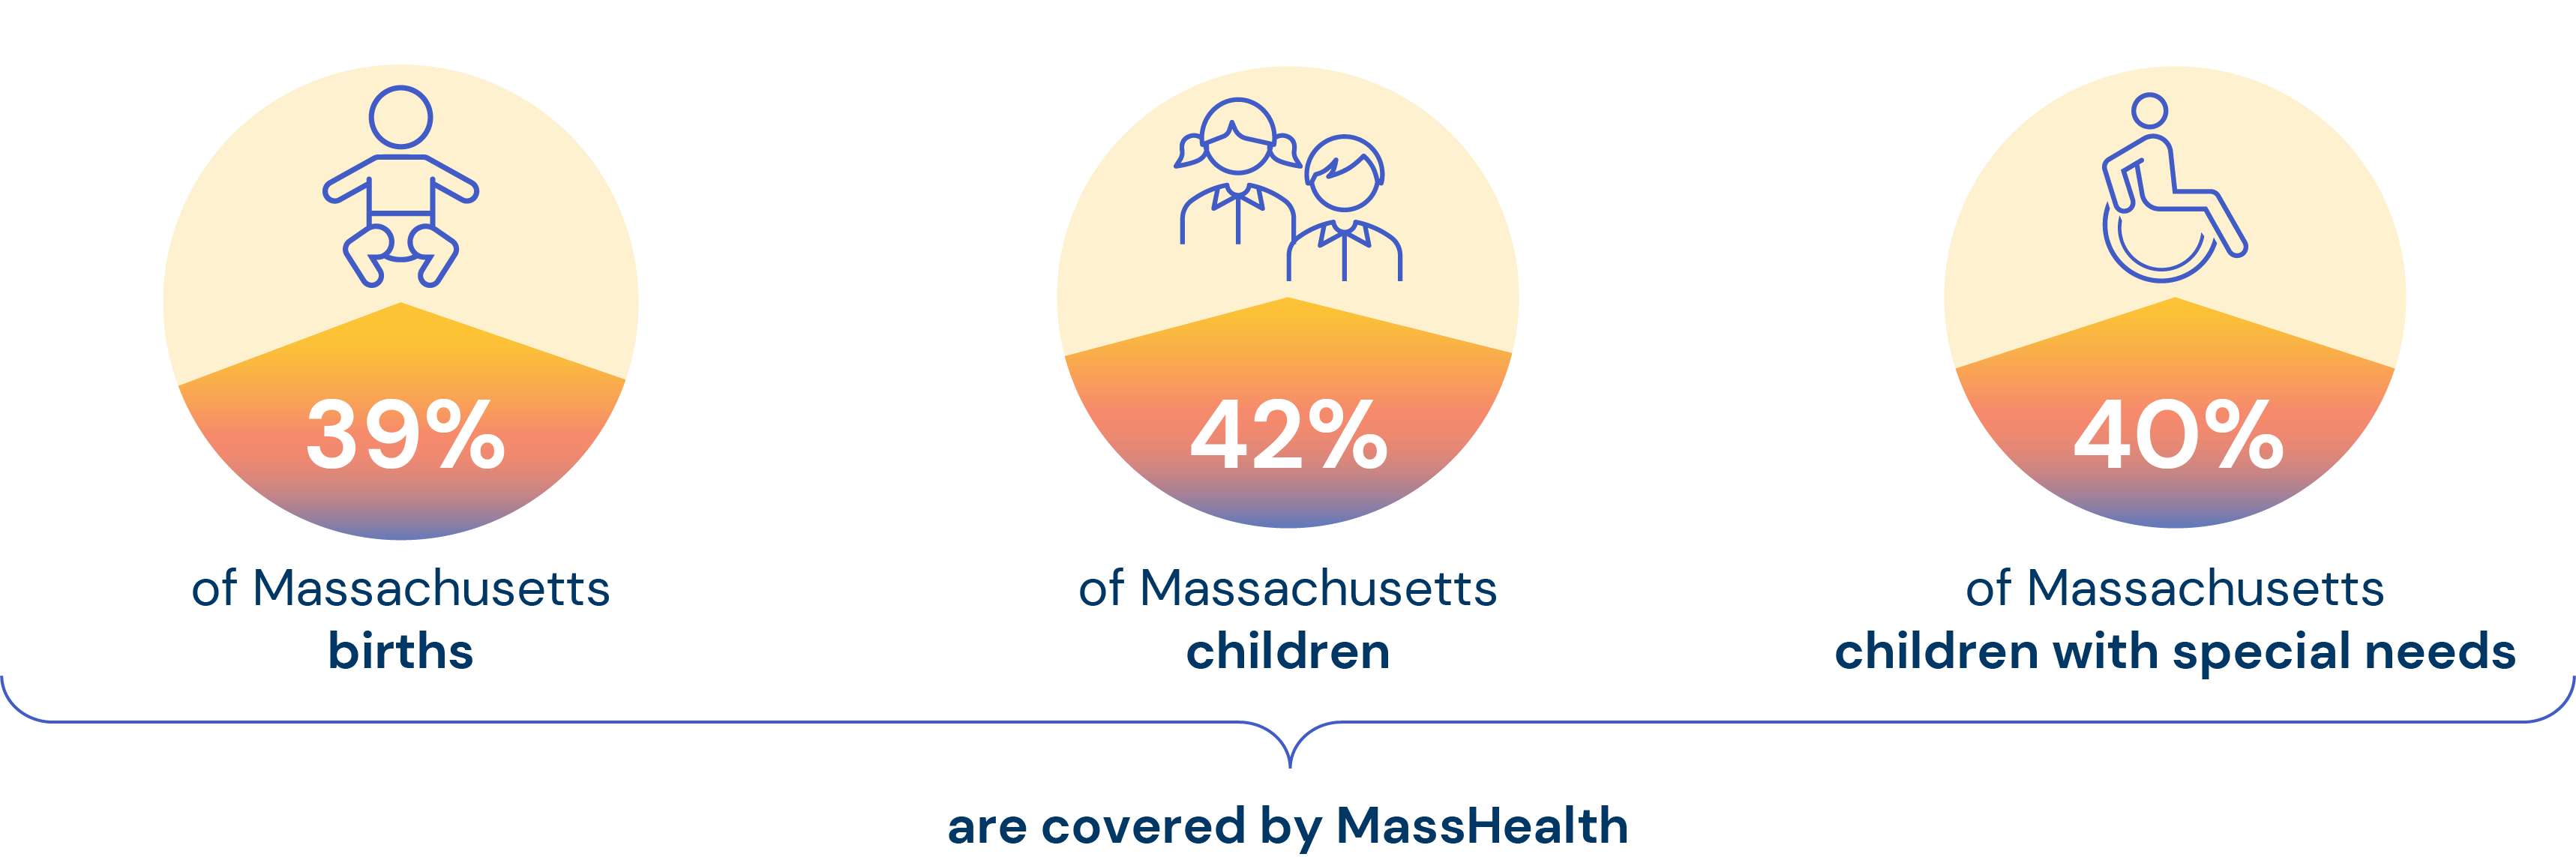 39% of Massachusetts birth, 42% of MA children, and 40% of MA children with special needs, are covered by MassHealth (pie chart infographics)